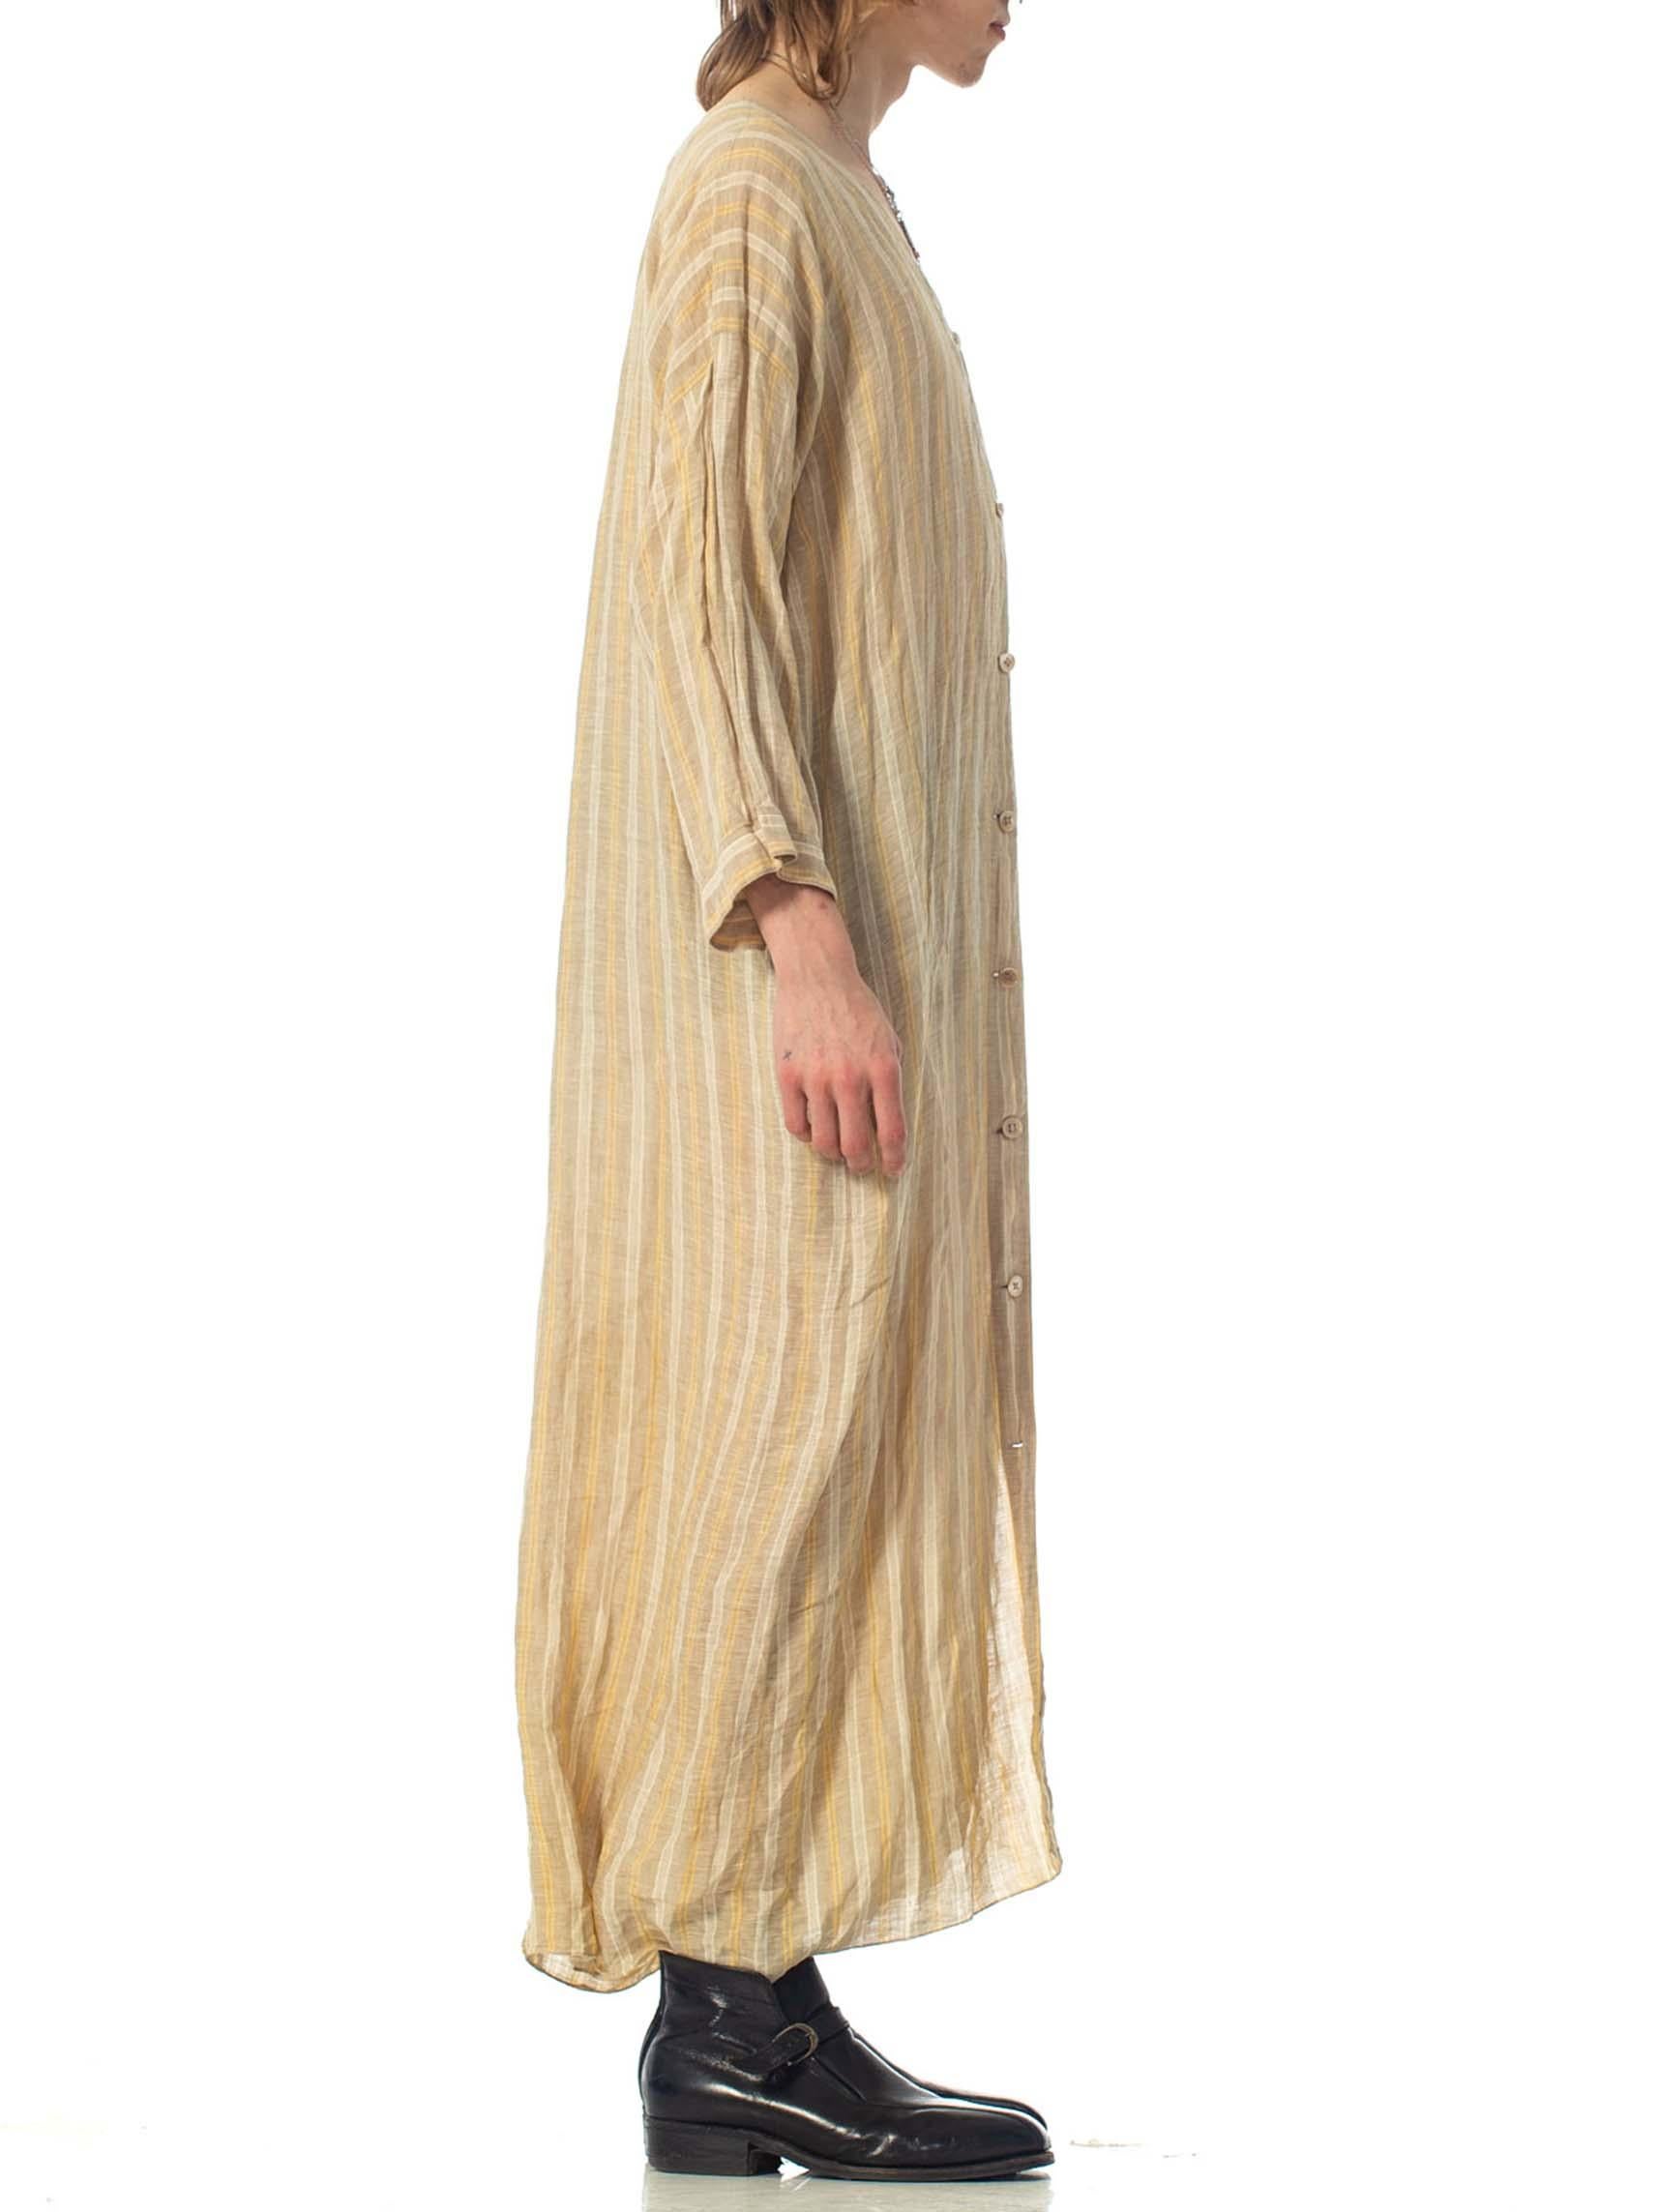 1970S ISSEY MIYAKE STYLE- Style Beige & White Cotton Blend Tunic Duster For Sale 1